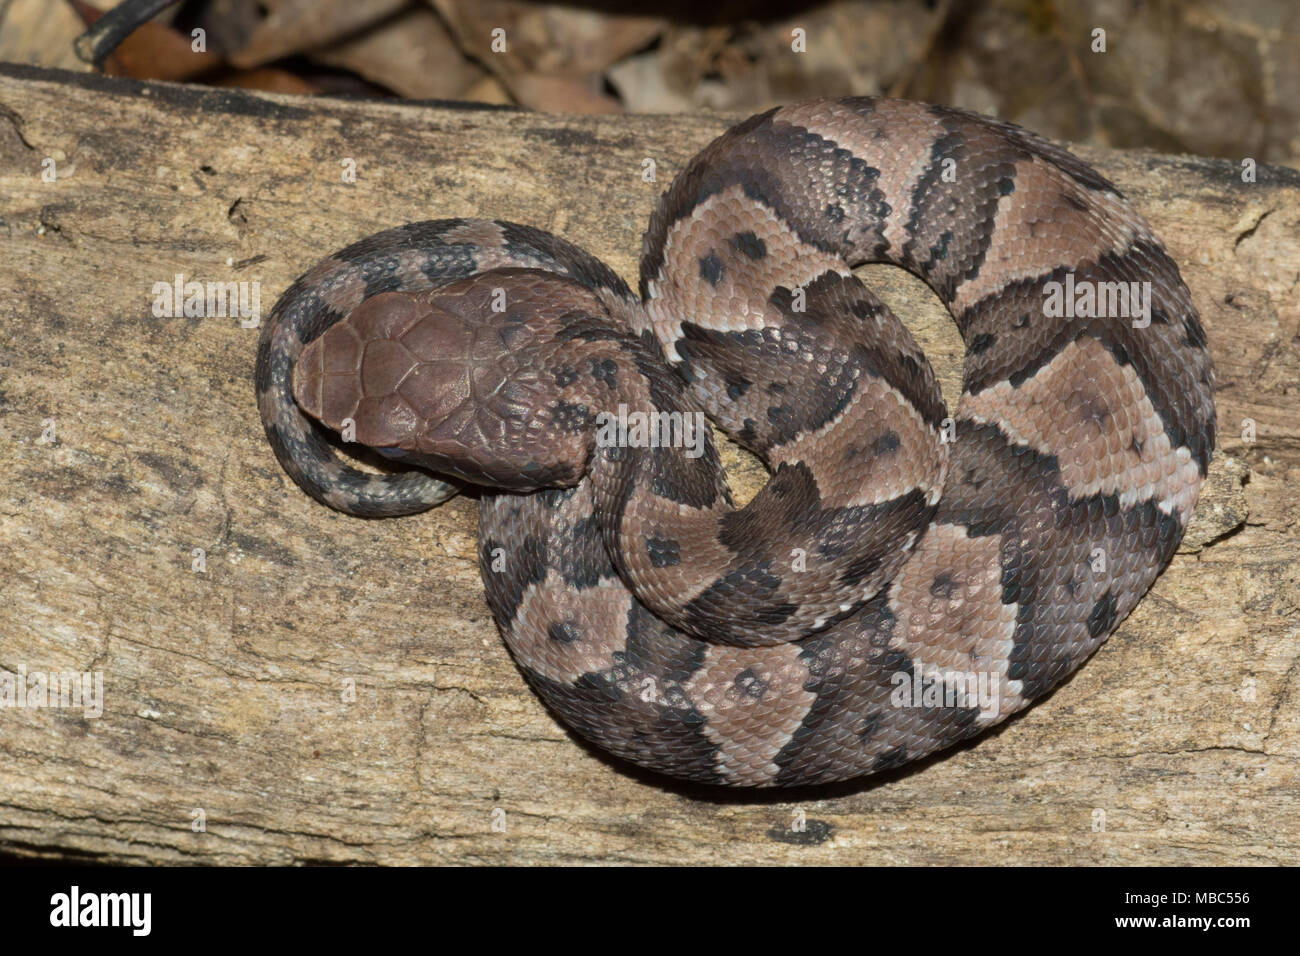 Newly hatched cottonmouth basking on a rotten log. Stock Photo